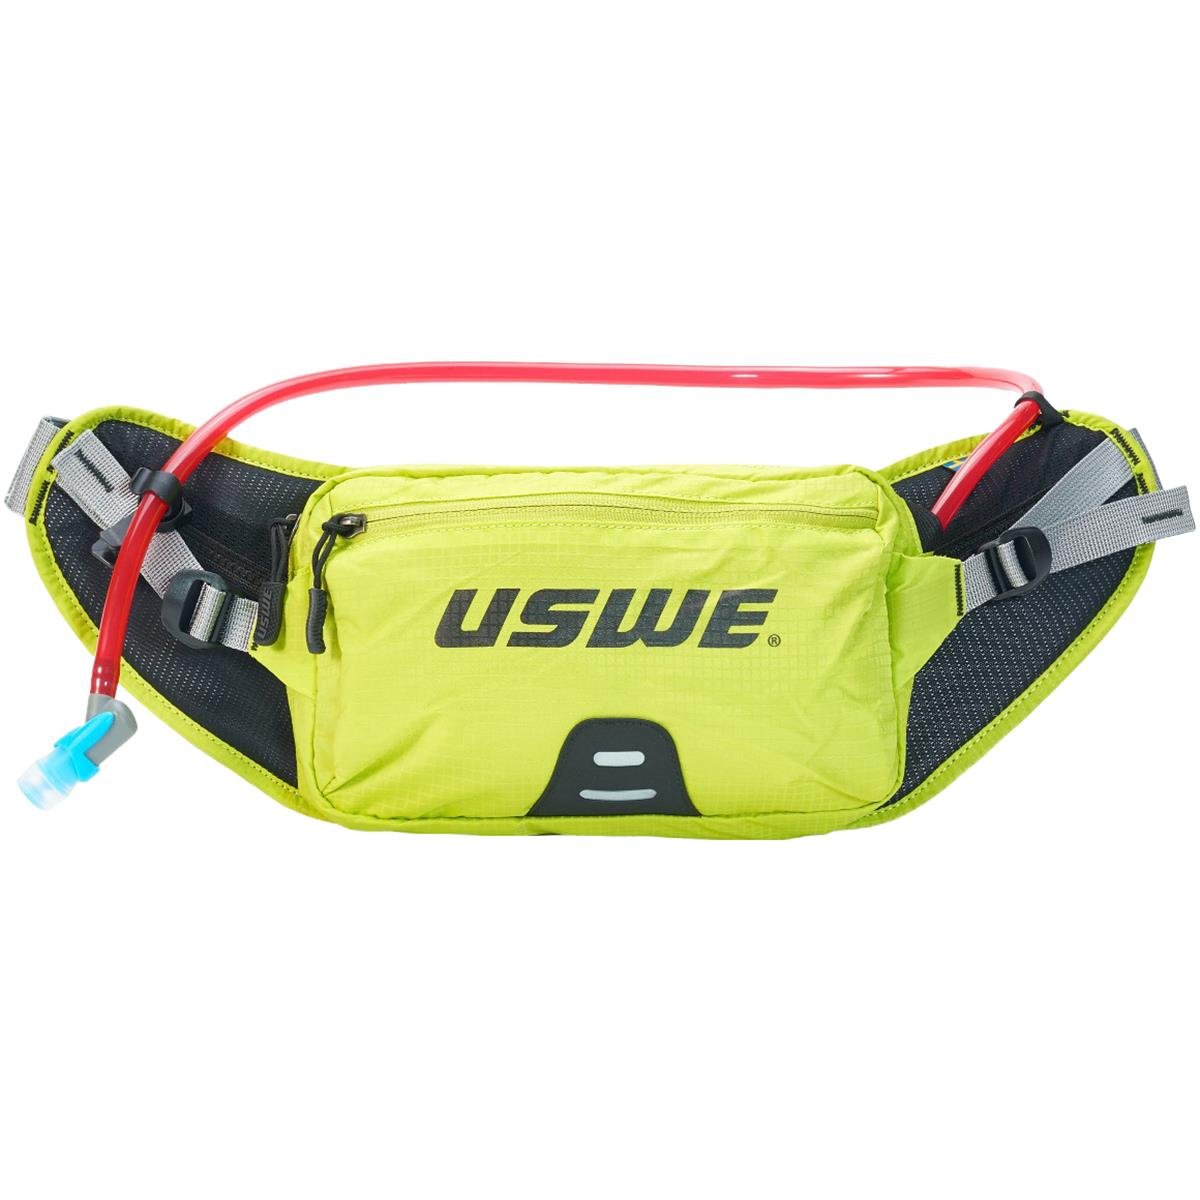 USWE Hip Pack with Hydration System 1 Liters Zulo 2 Yellow